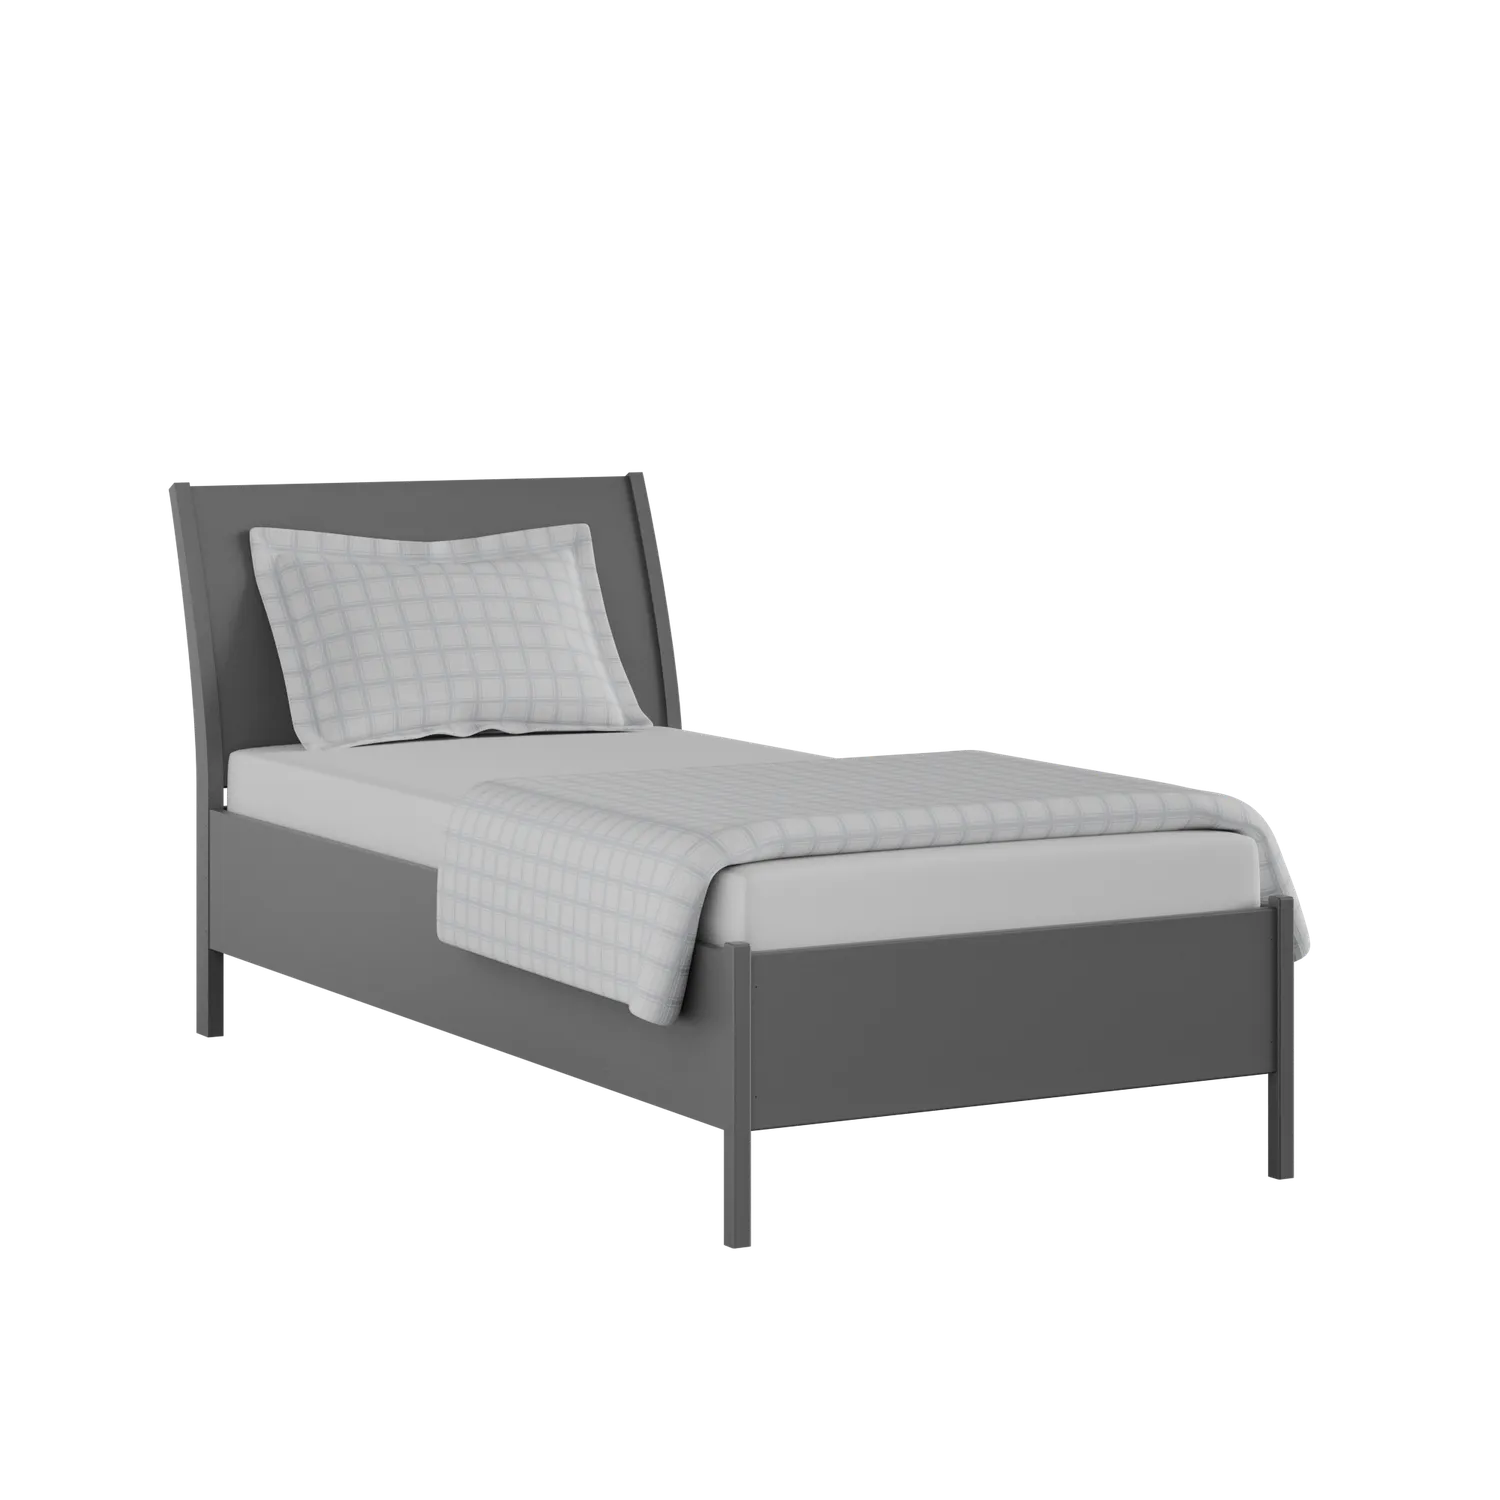 Hunt Painted single painted wood bed in grey with Juno mattress